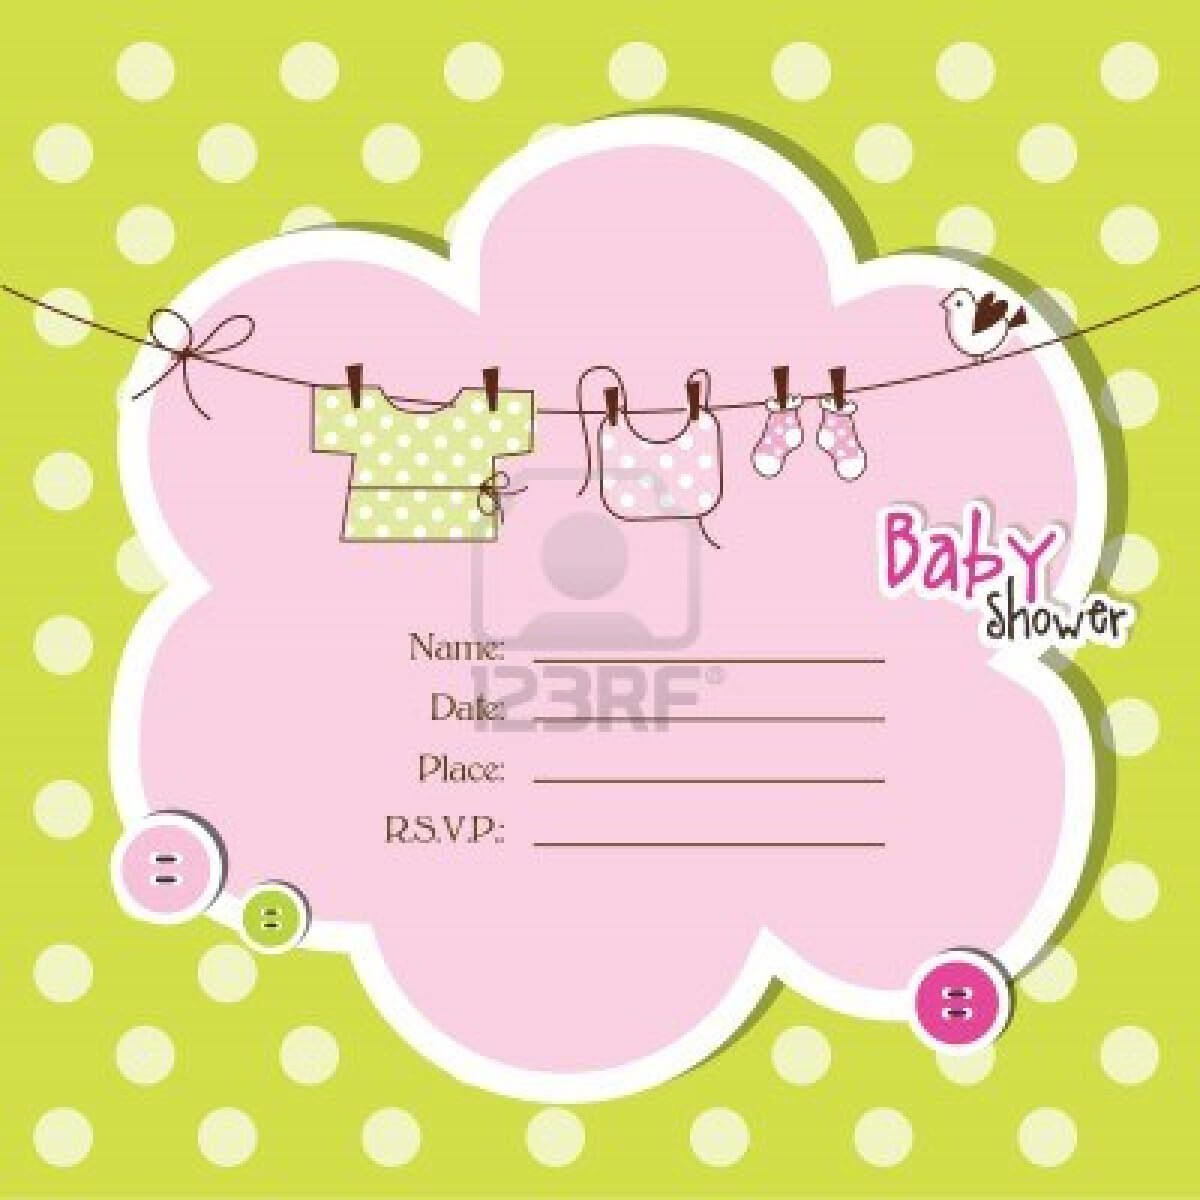 Free Downloadable Invitation Templates Intended For Free Baby Shower Invitation Templates Microsoft Word